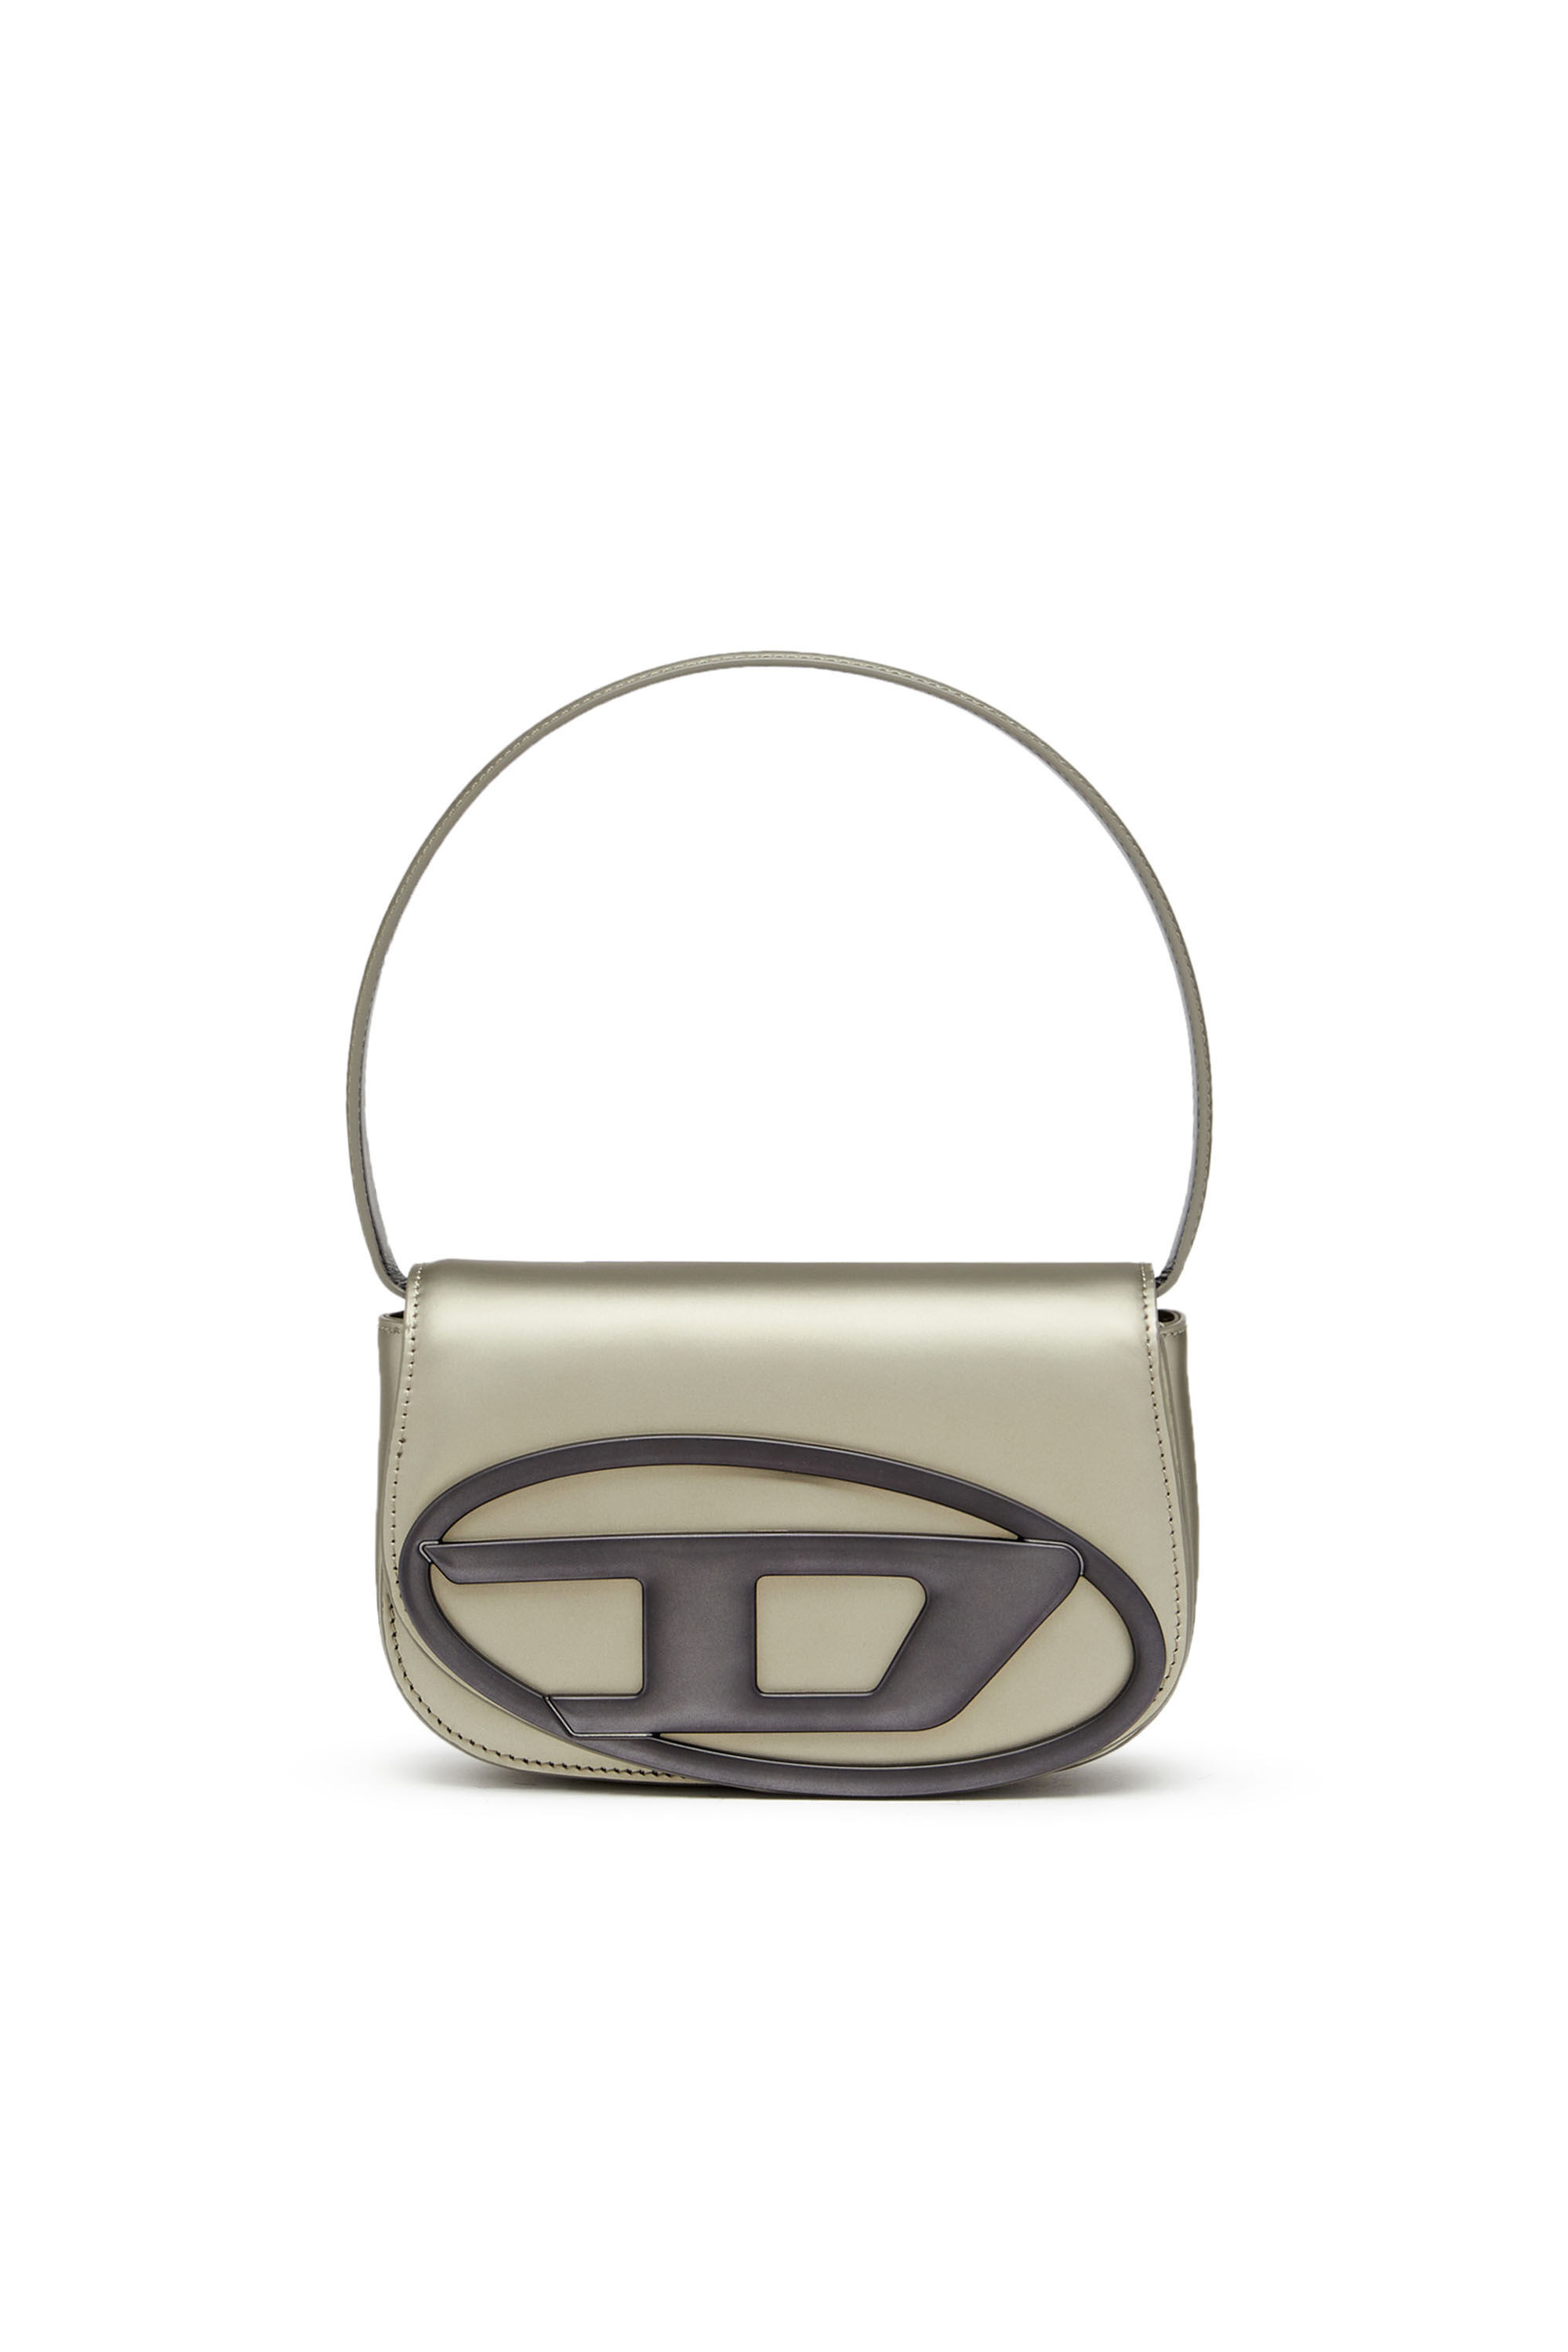 1DR - Iconic shoulder bag in metallic leather grey